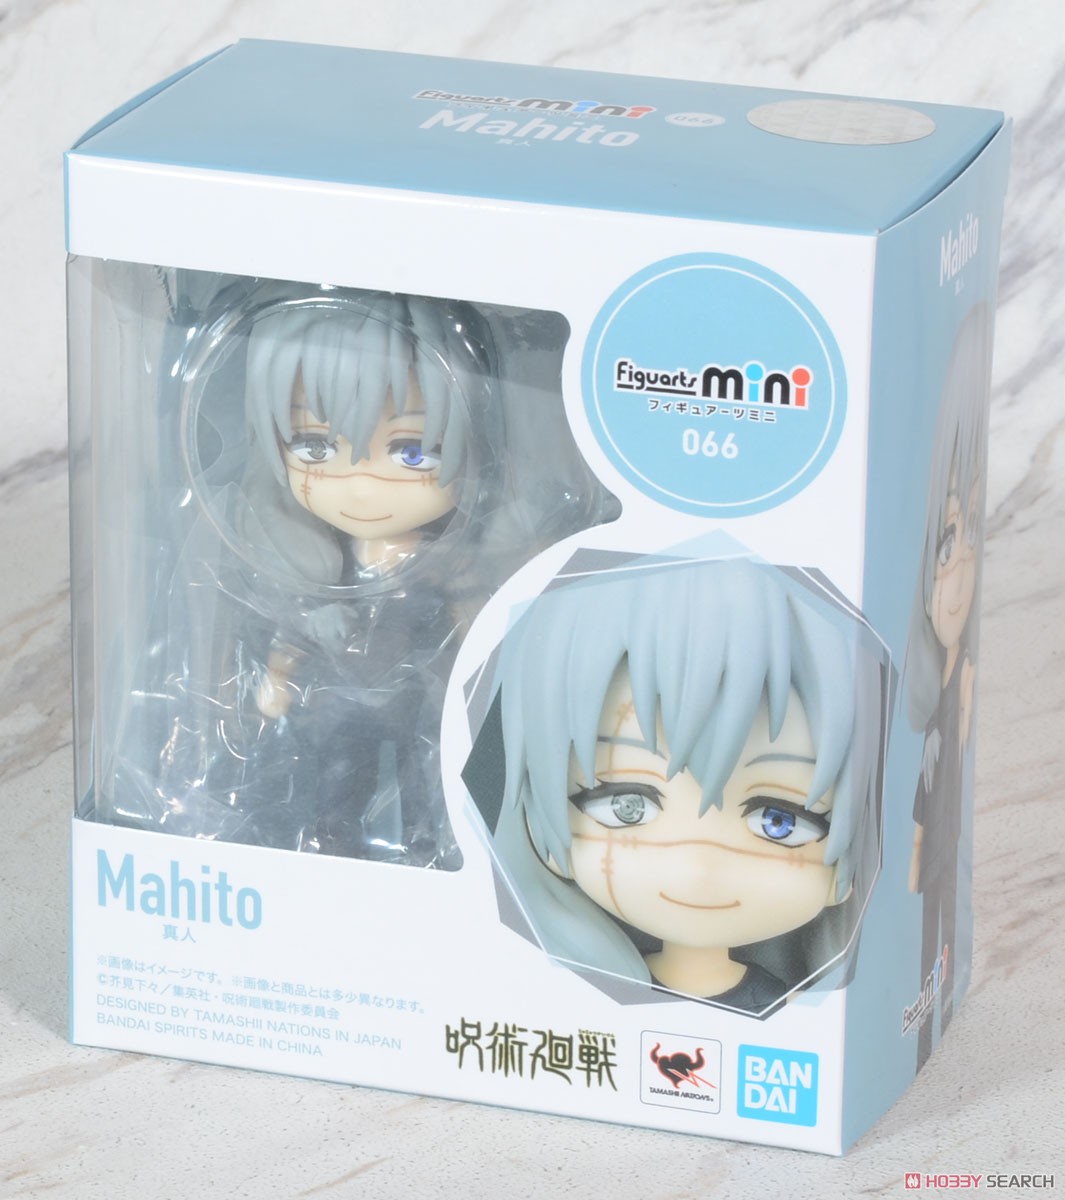 Figuarts Mini Mahito (Completed) Package1